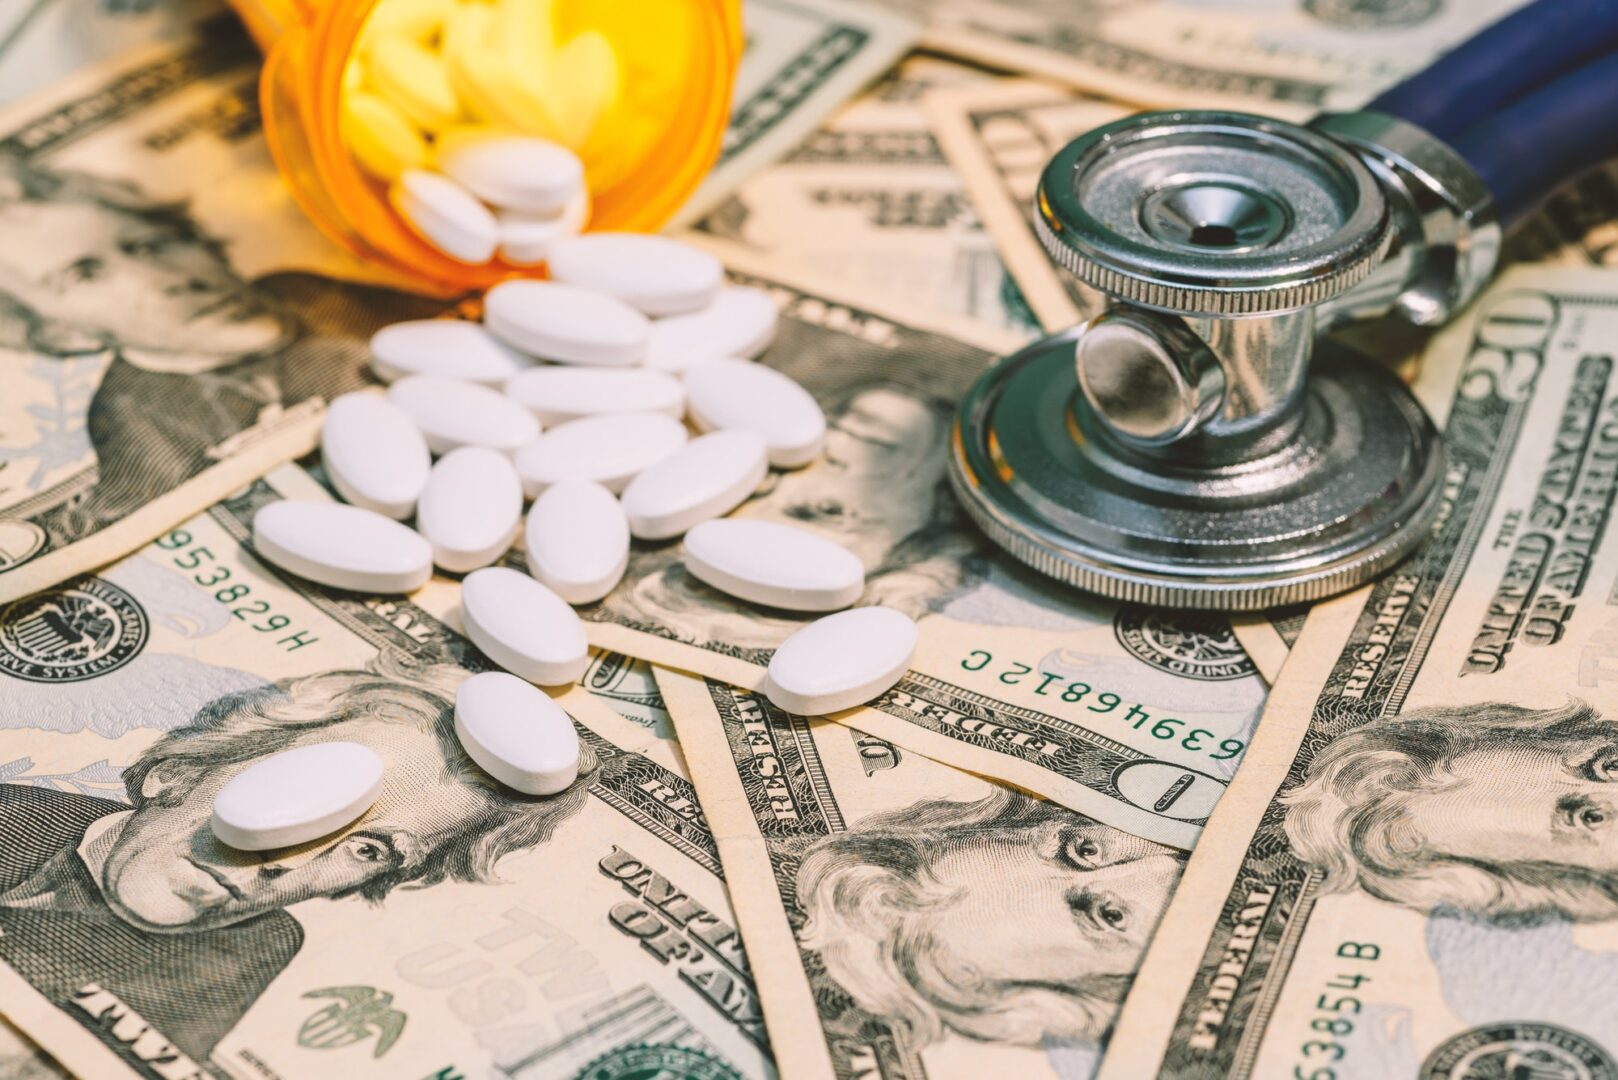 A pile of money sitting next to pills and a stethoscope.